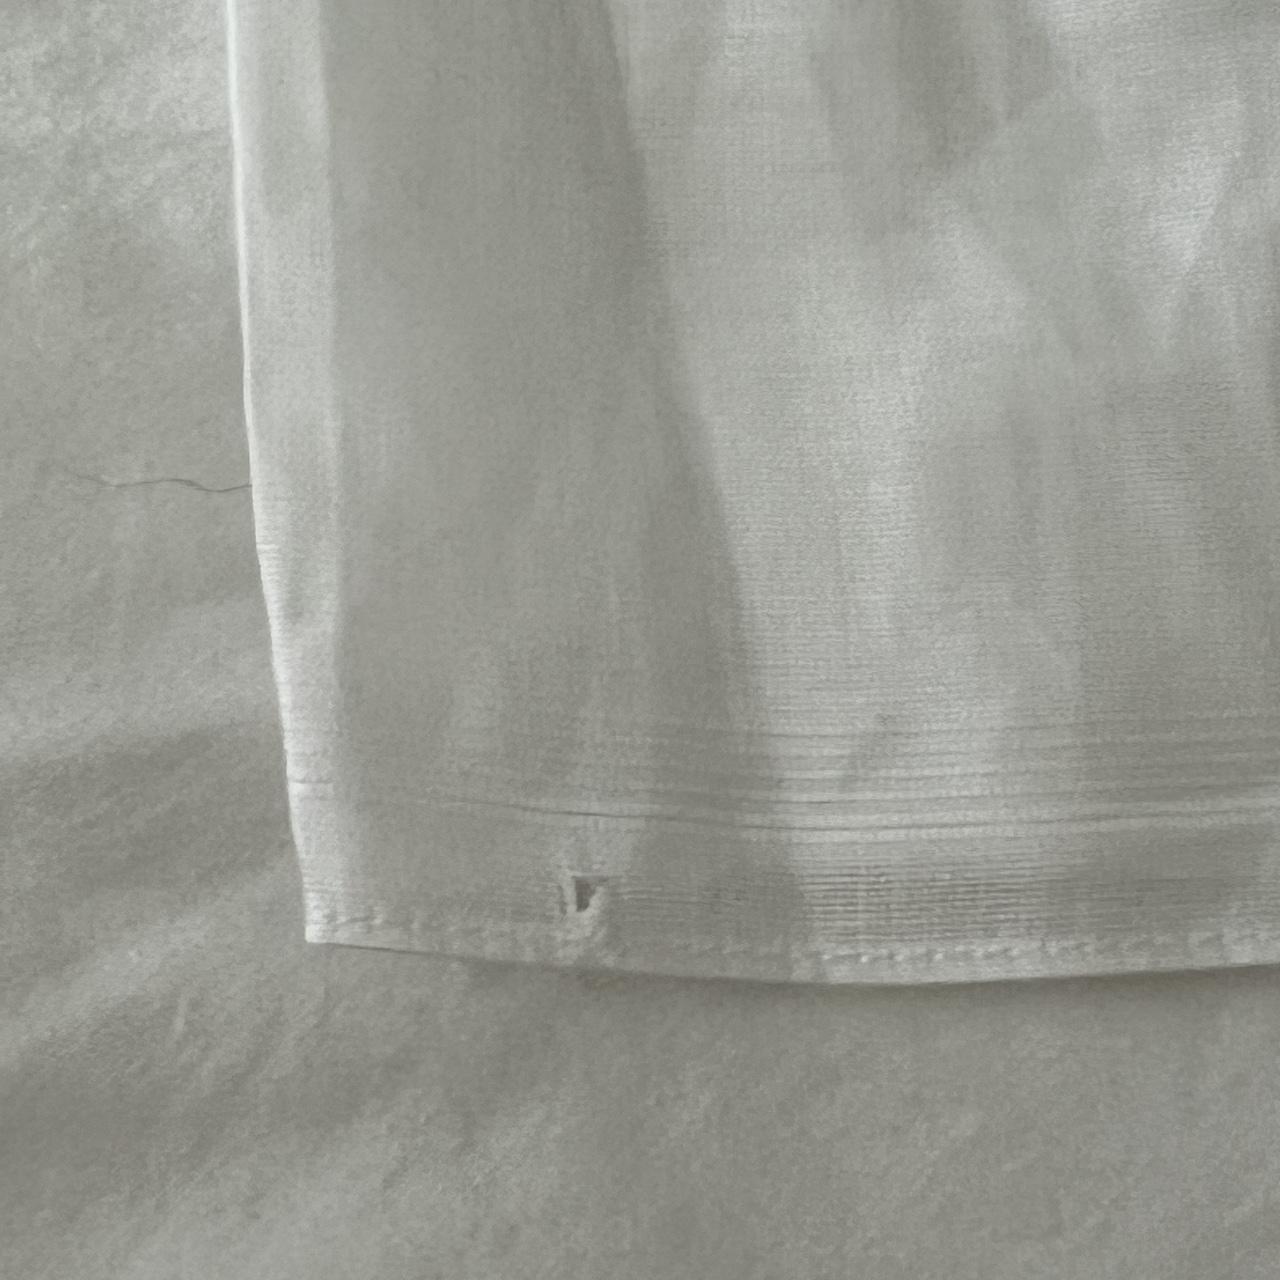 Givenchy Vintage Napkin It has some yellowing that... - Depop